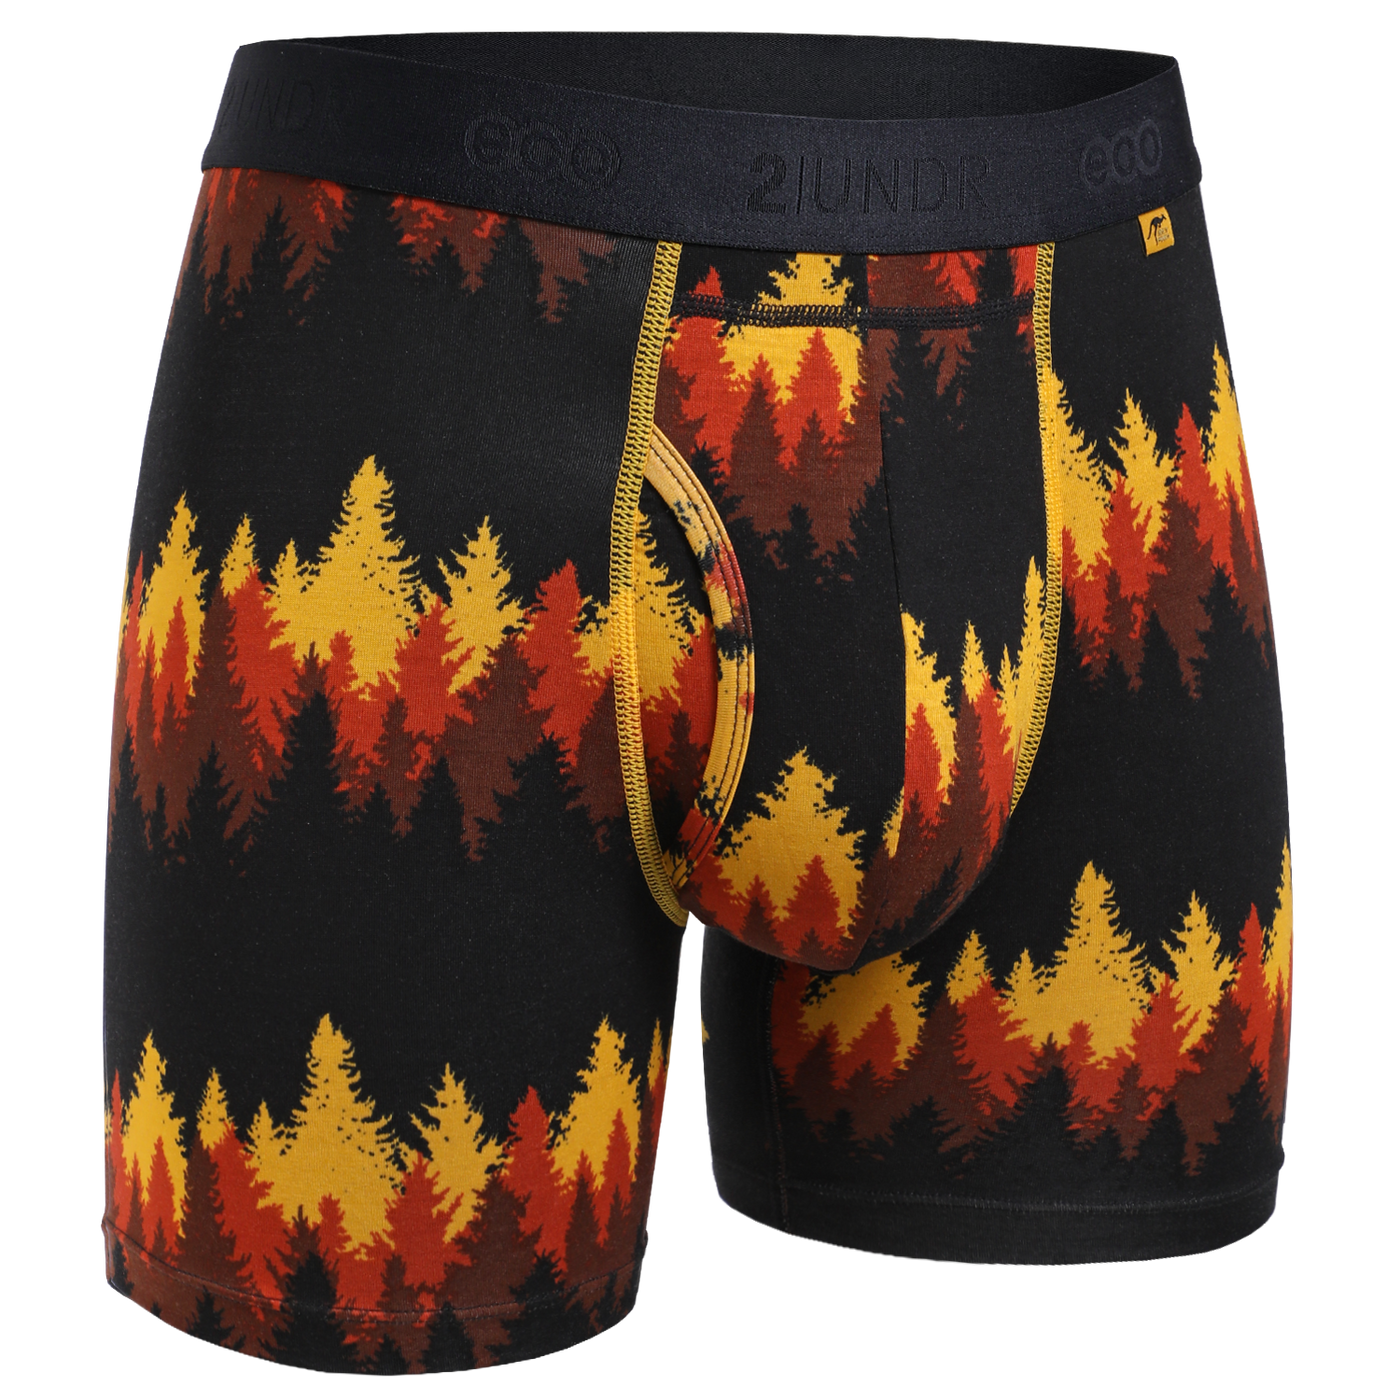 Swing Eco Shift Boxer Brief Print 3 Pack - Fir-Tortugas-Undrsea